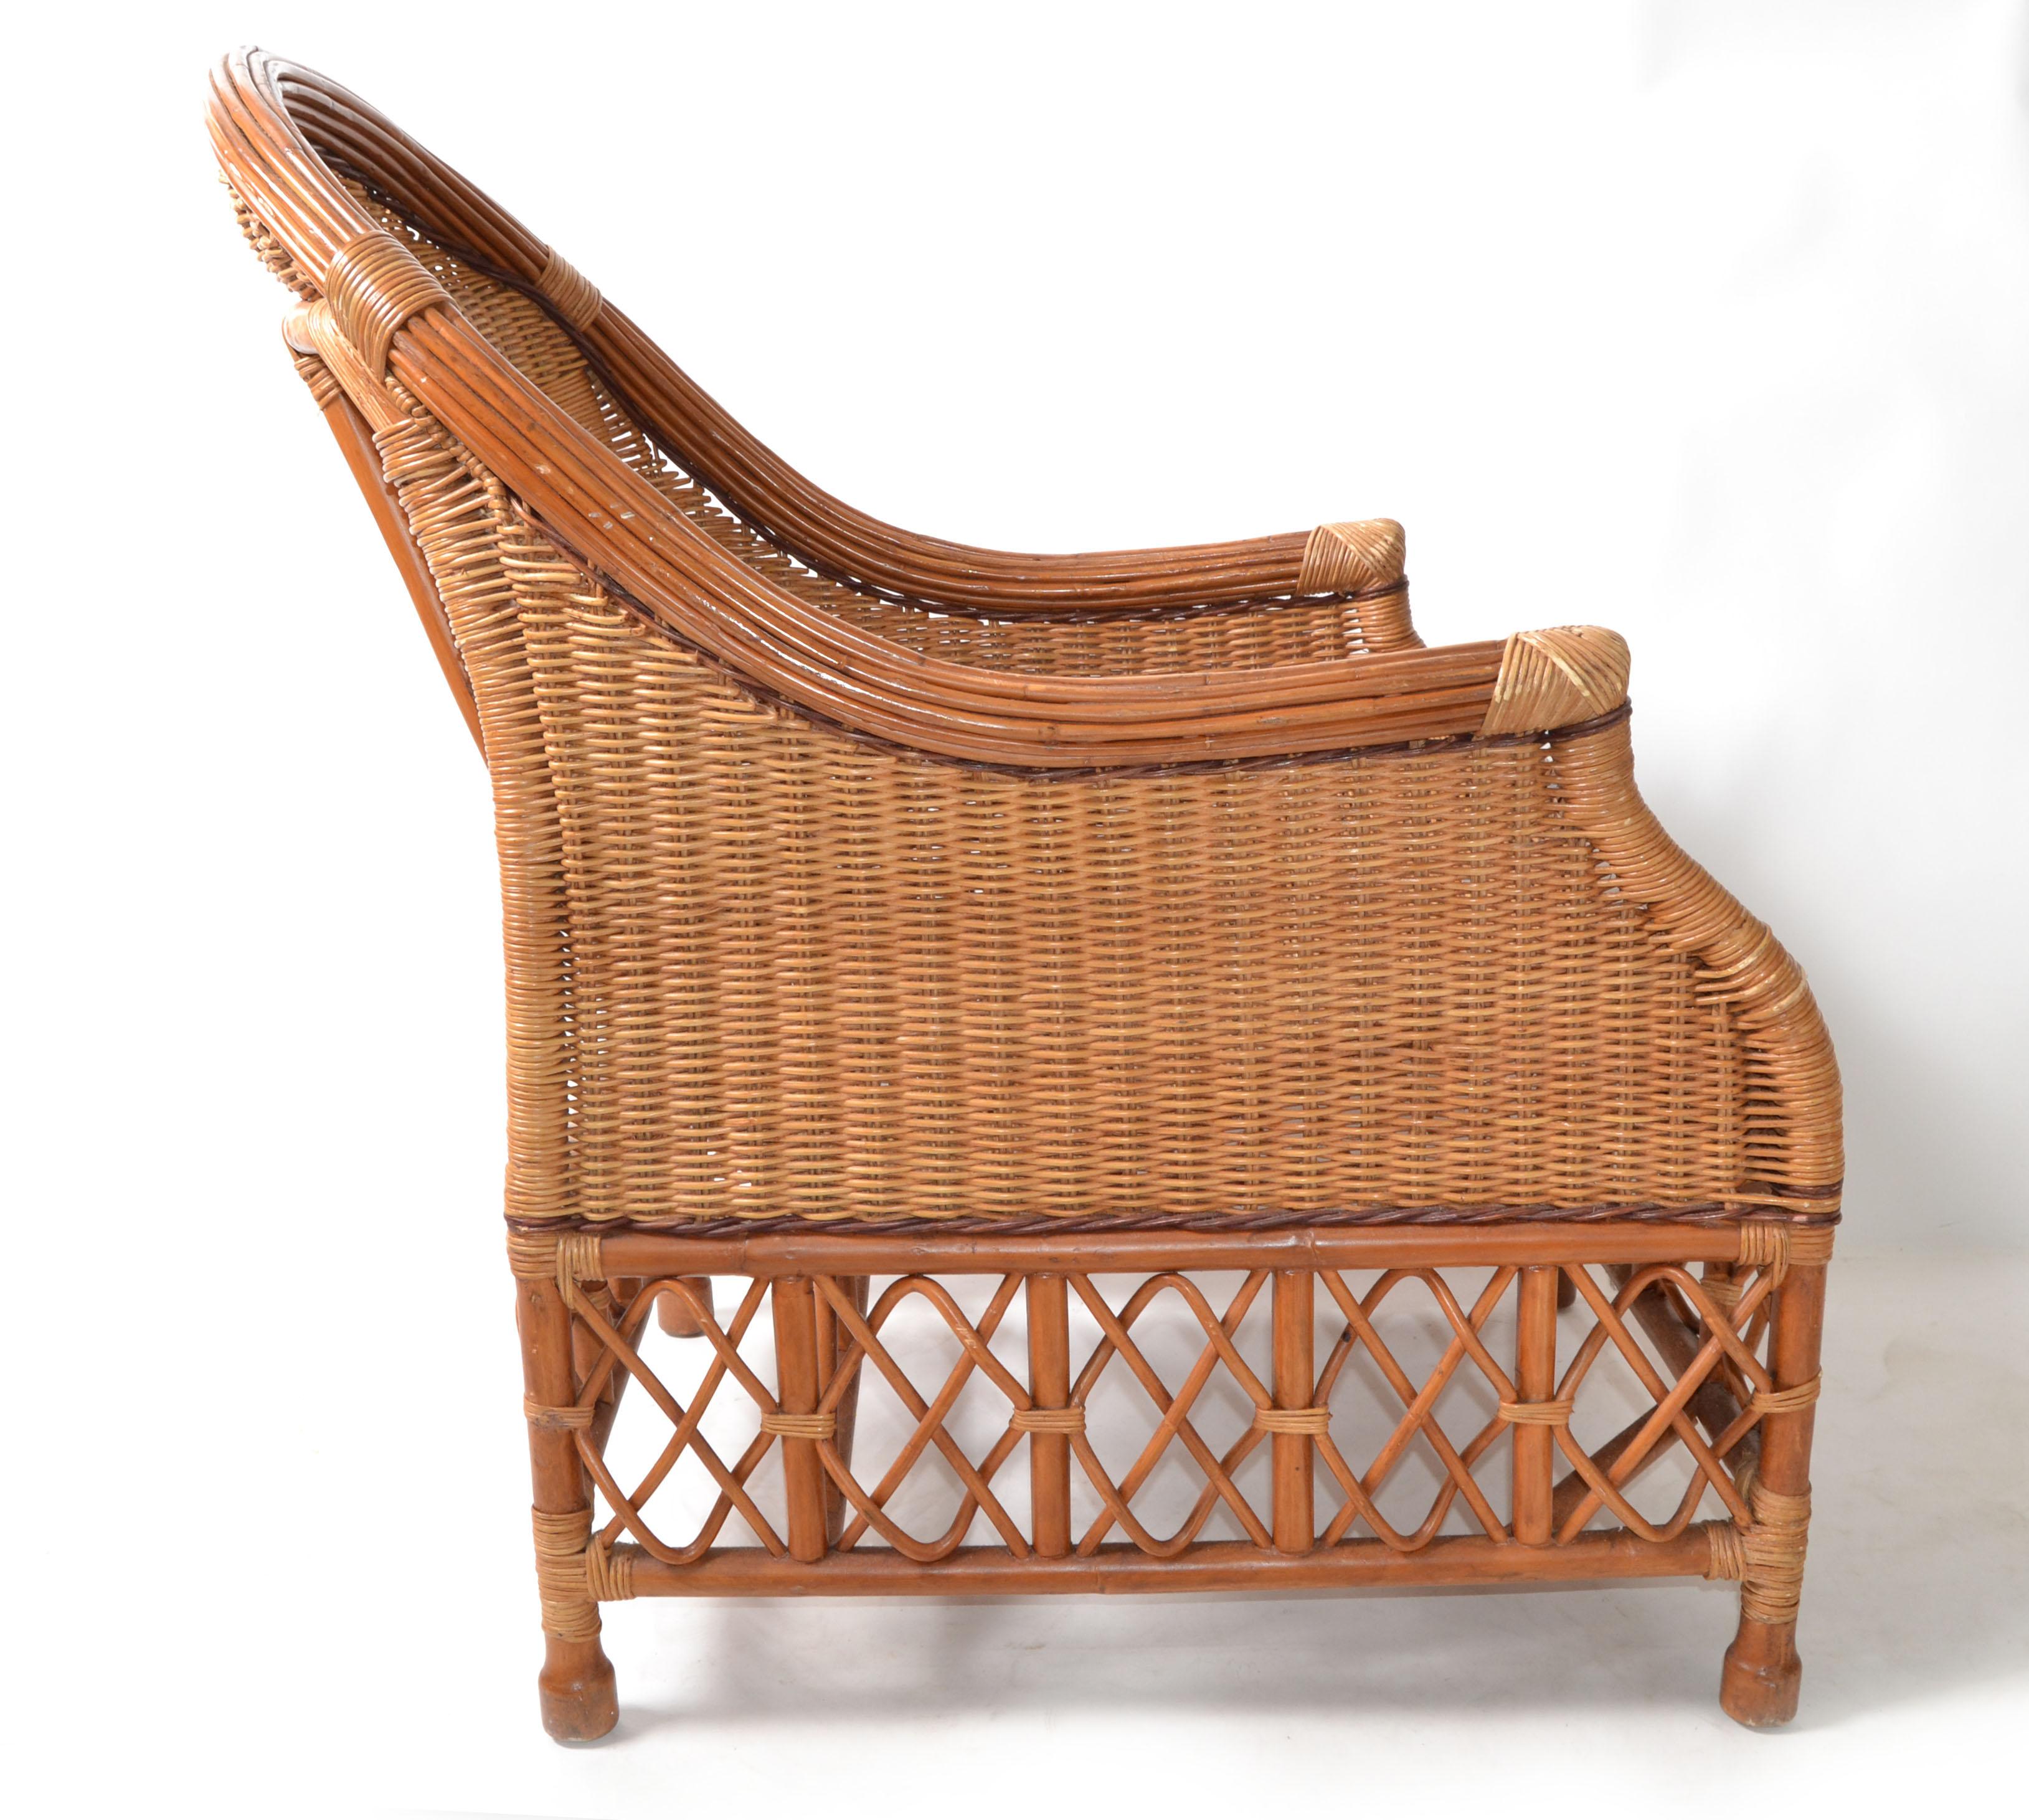 American Bamboo, Cane & Wicker Lounge Chair Handwoven Bohemian 1960 Mid-Century Modern For Sale